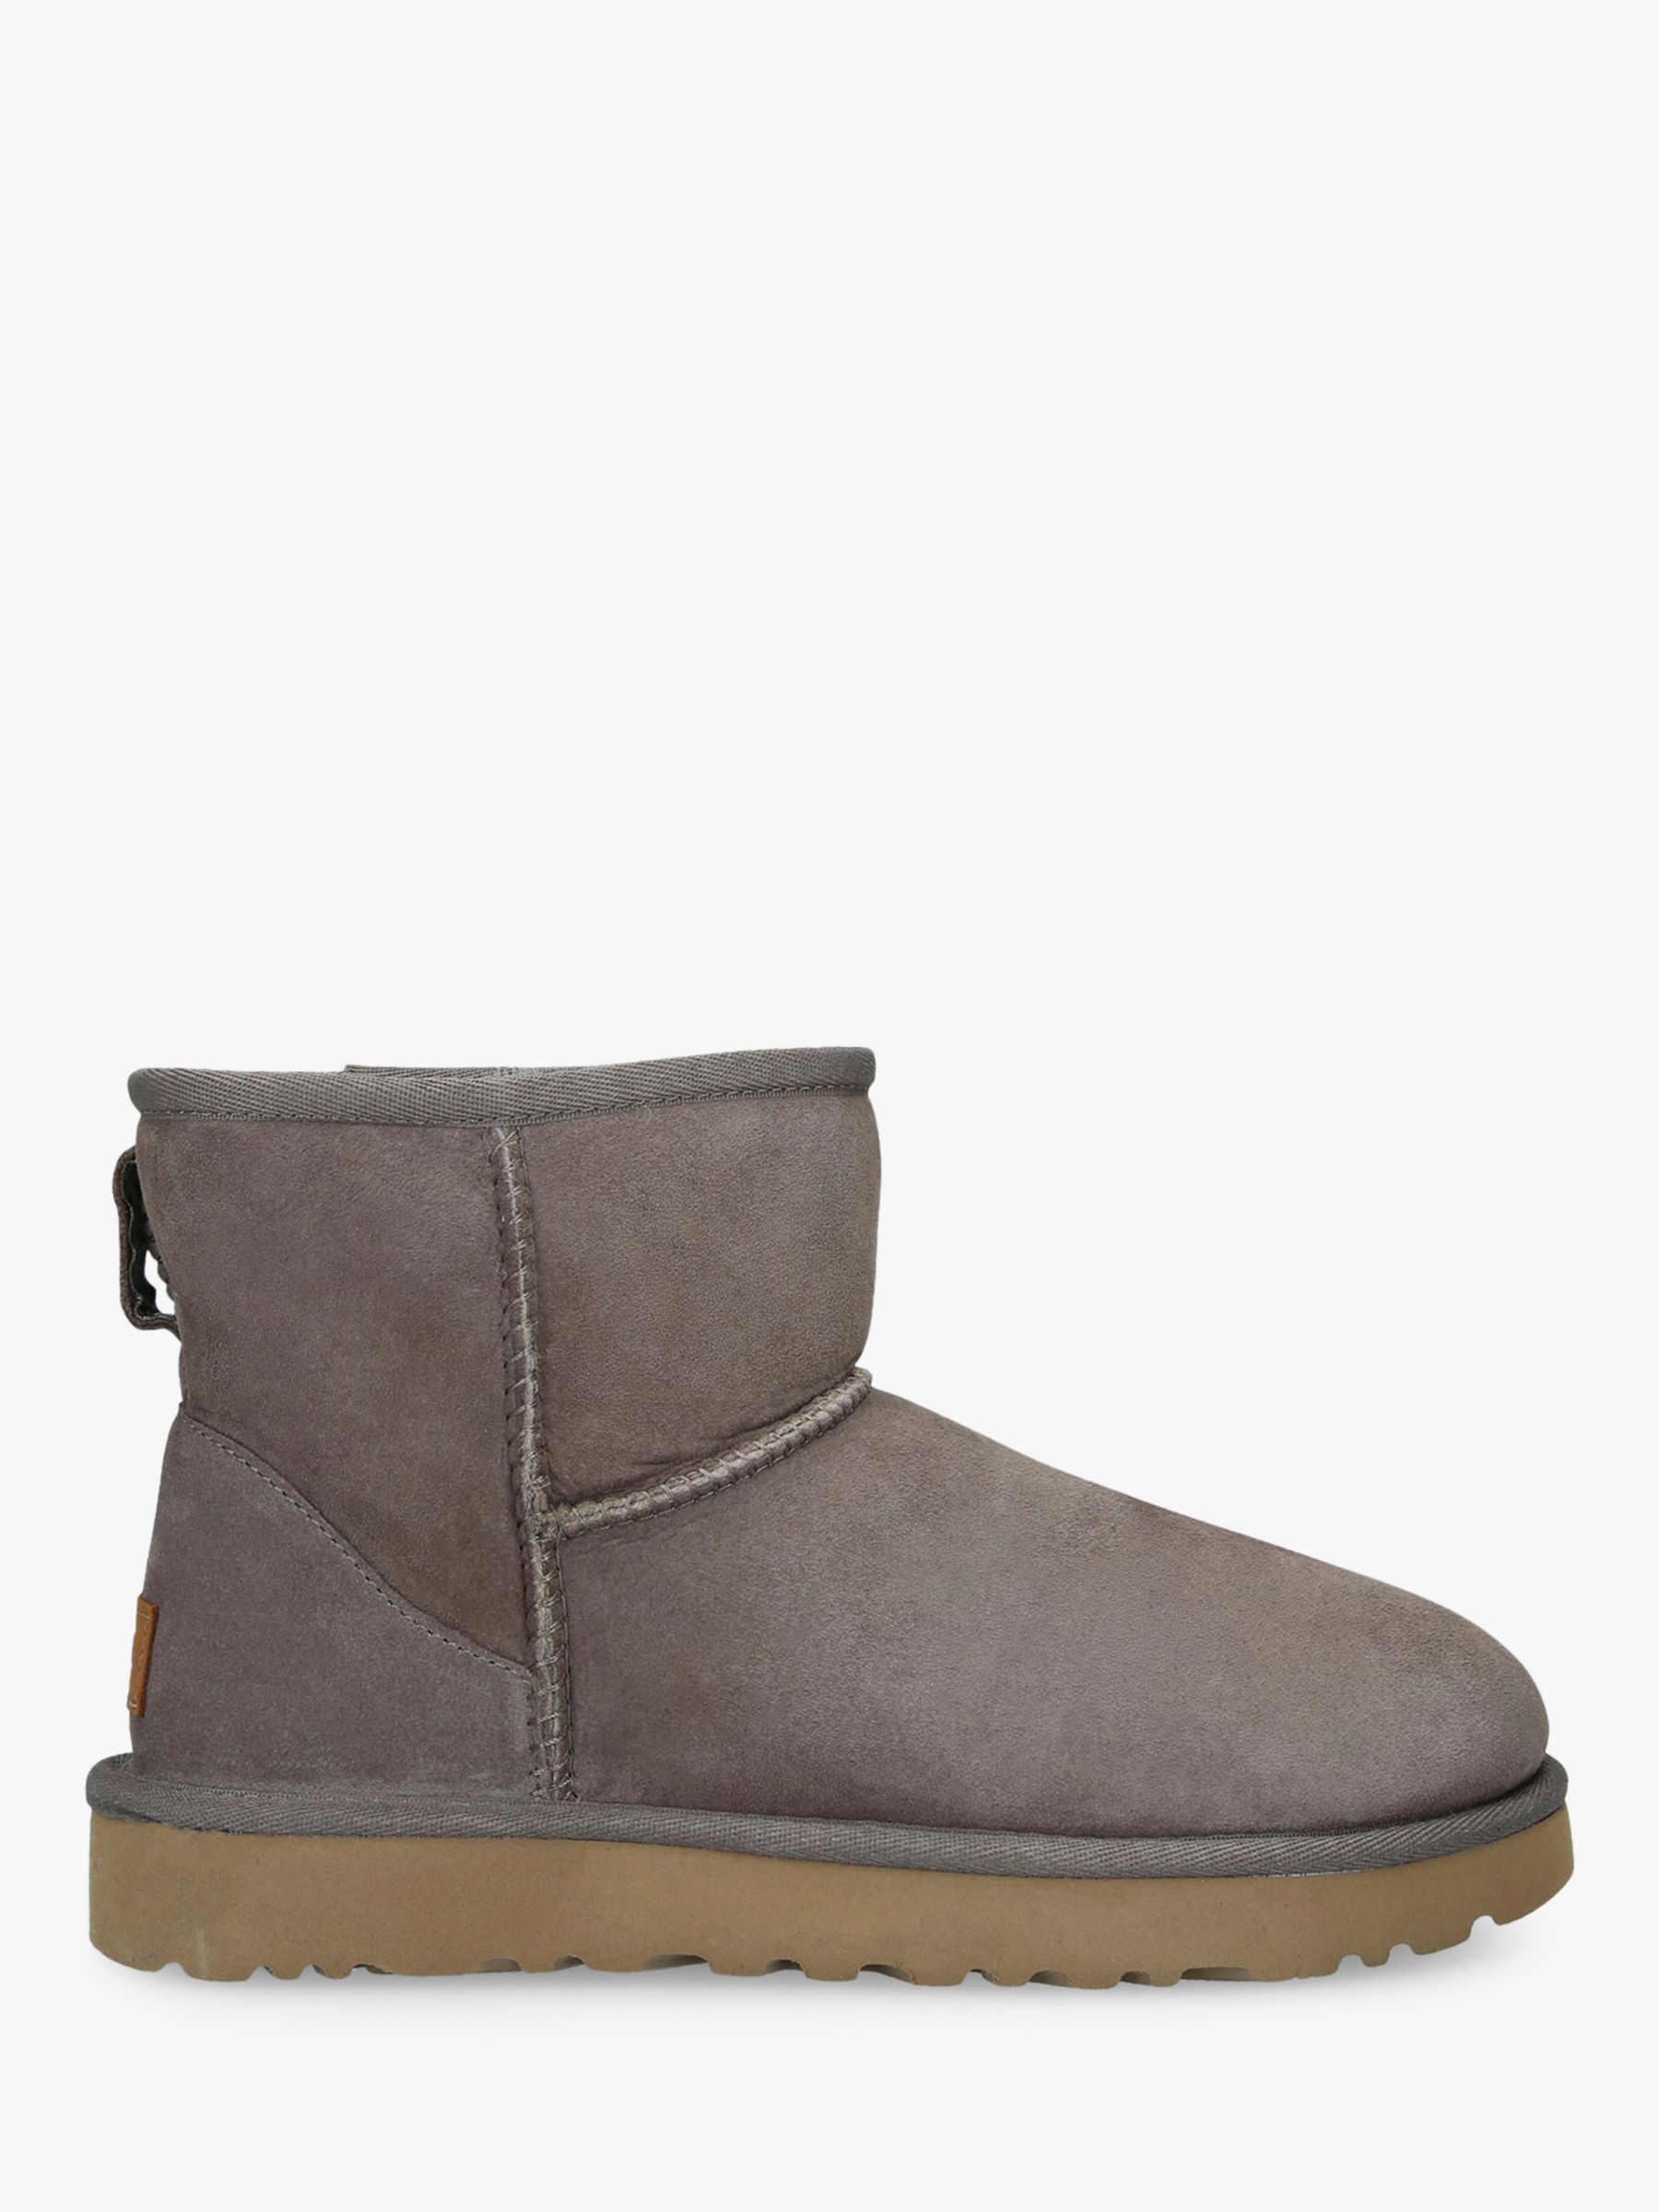 natural shoe store uggs - getblank 